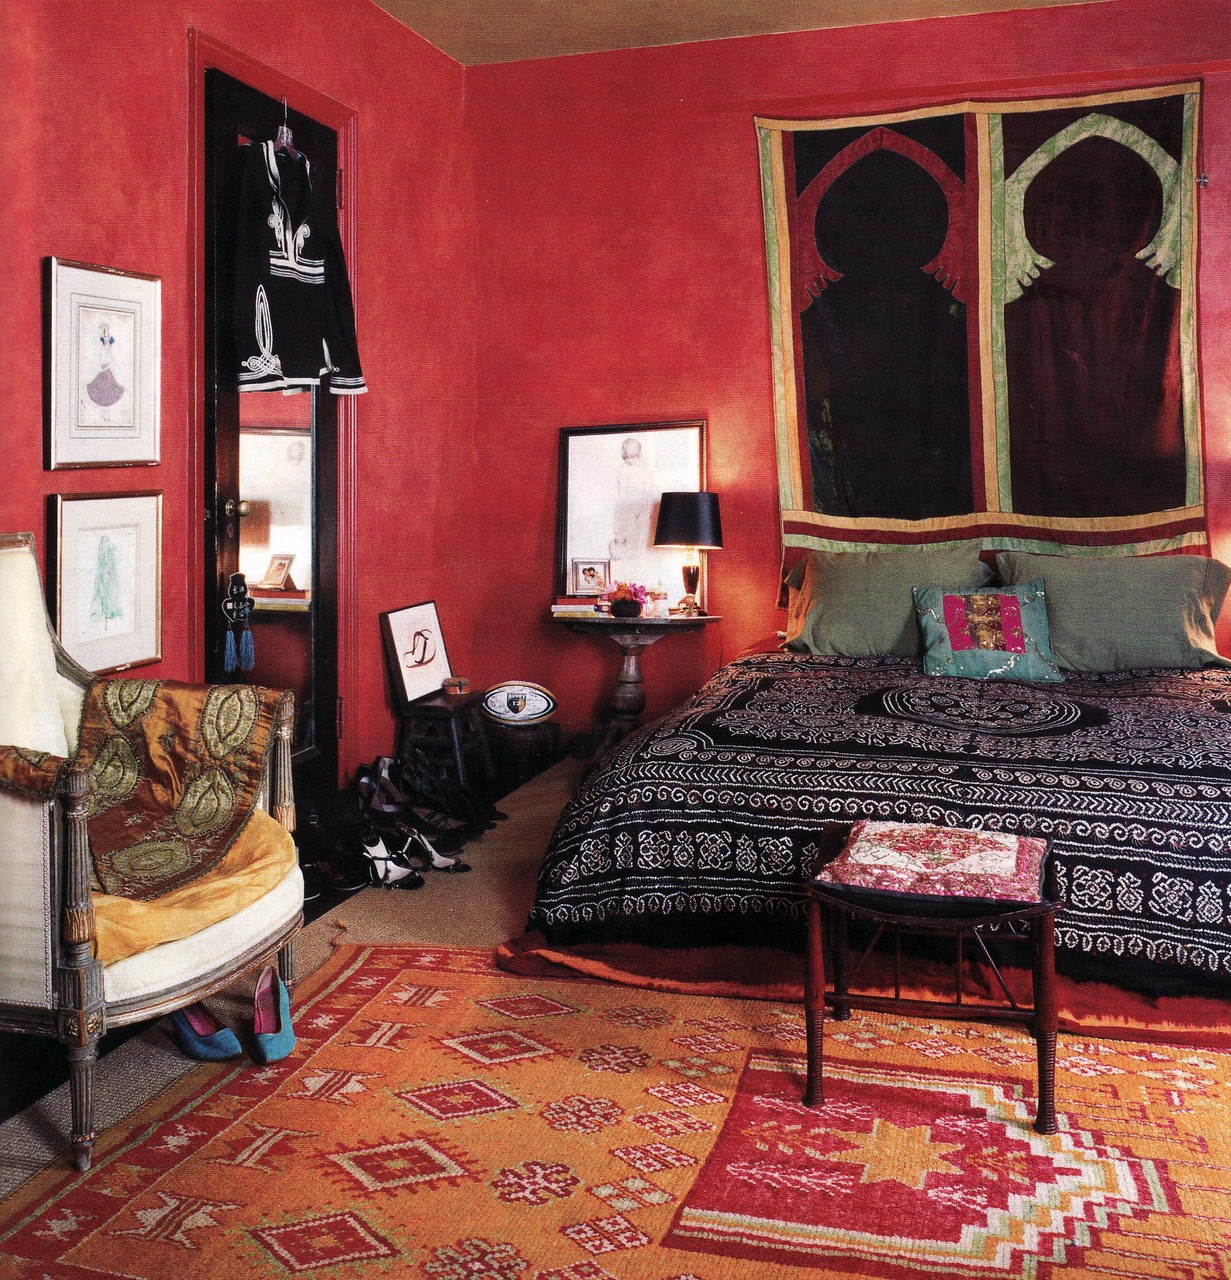 superb design of a Bohemian inspired bedroom with exotic and Indian inspiration